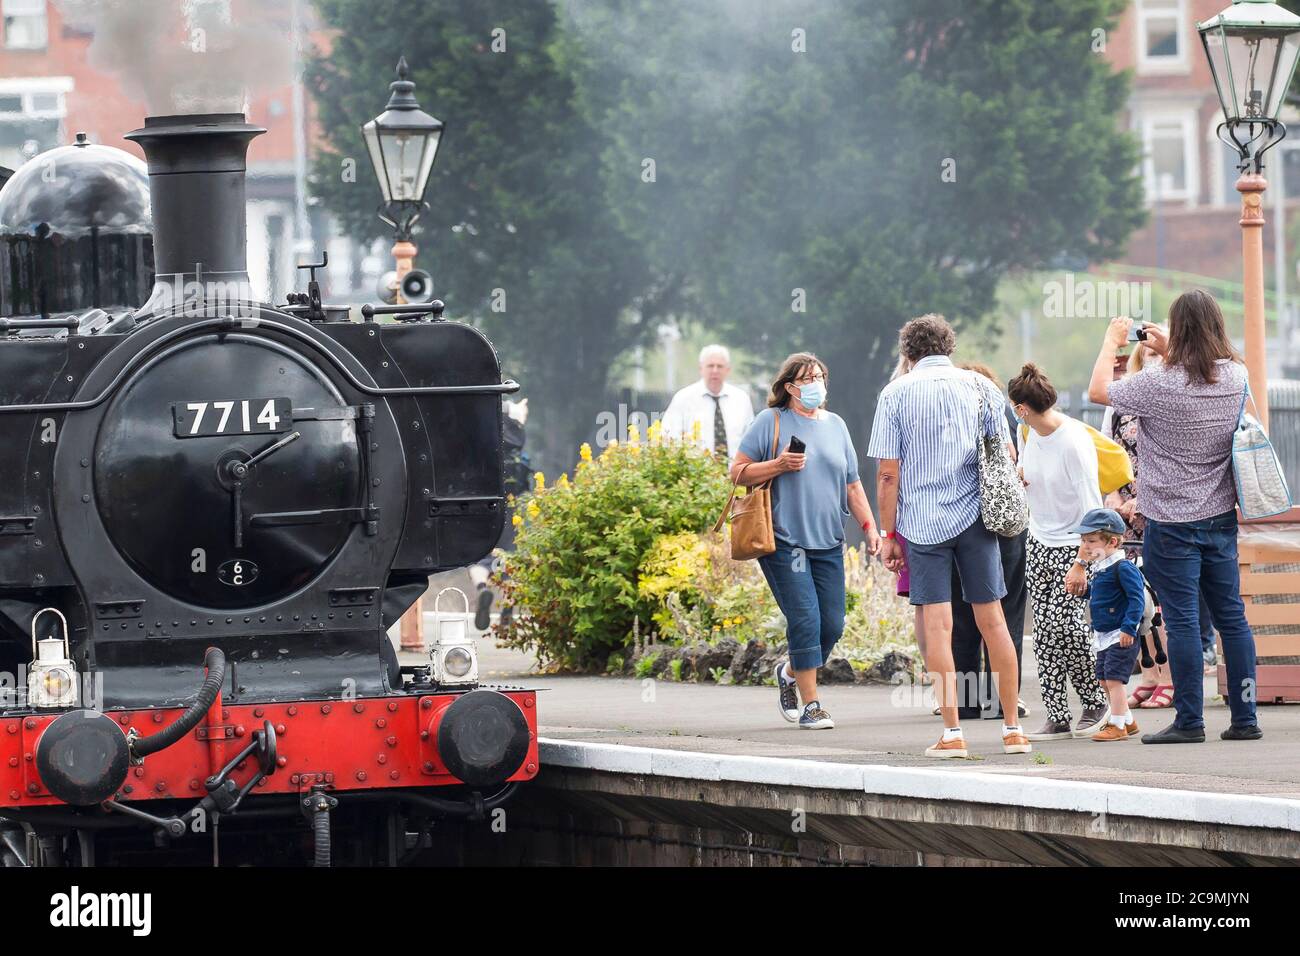 Kidderminster, UK. 1st August, 2020. One of the Midlands' major tourist attractions is back on track today after months of forced closure due to coronavirus lockdown. The first passenger service leaves Kidderminster's Severn Valley Railway station with visitors happy that staff are taking every precaution possible to ensure their safety and enjoyment of this magnificent heritage railway. Credit: Lee Hudson/Alamy Live News Stock Photo